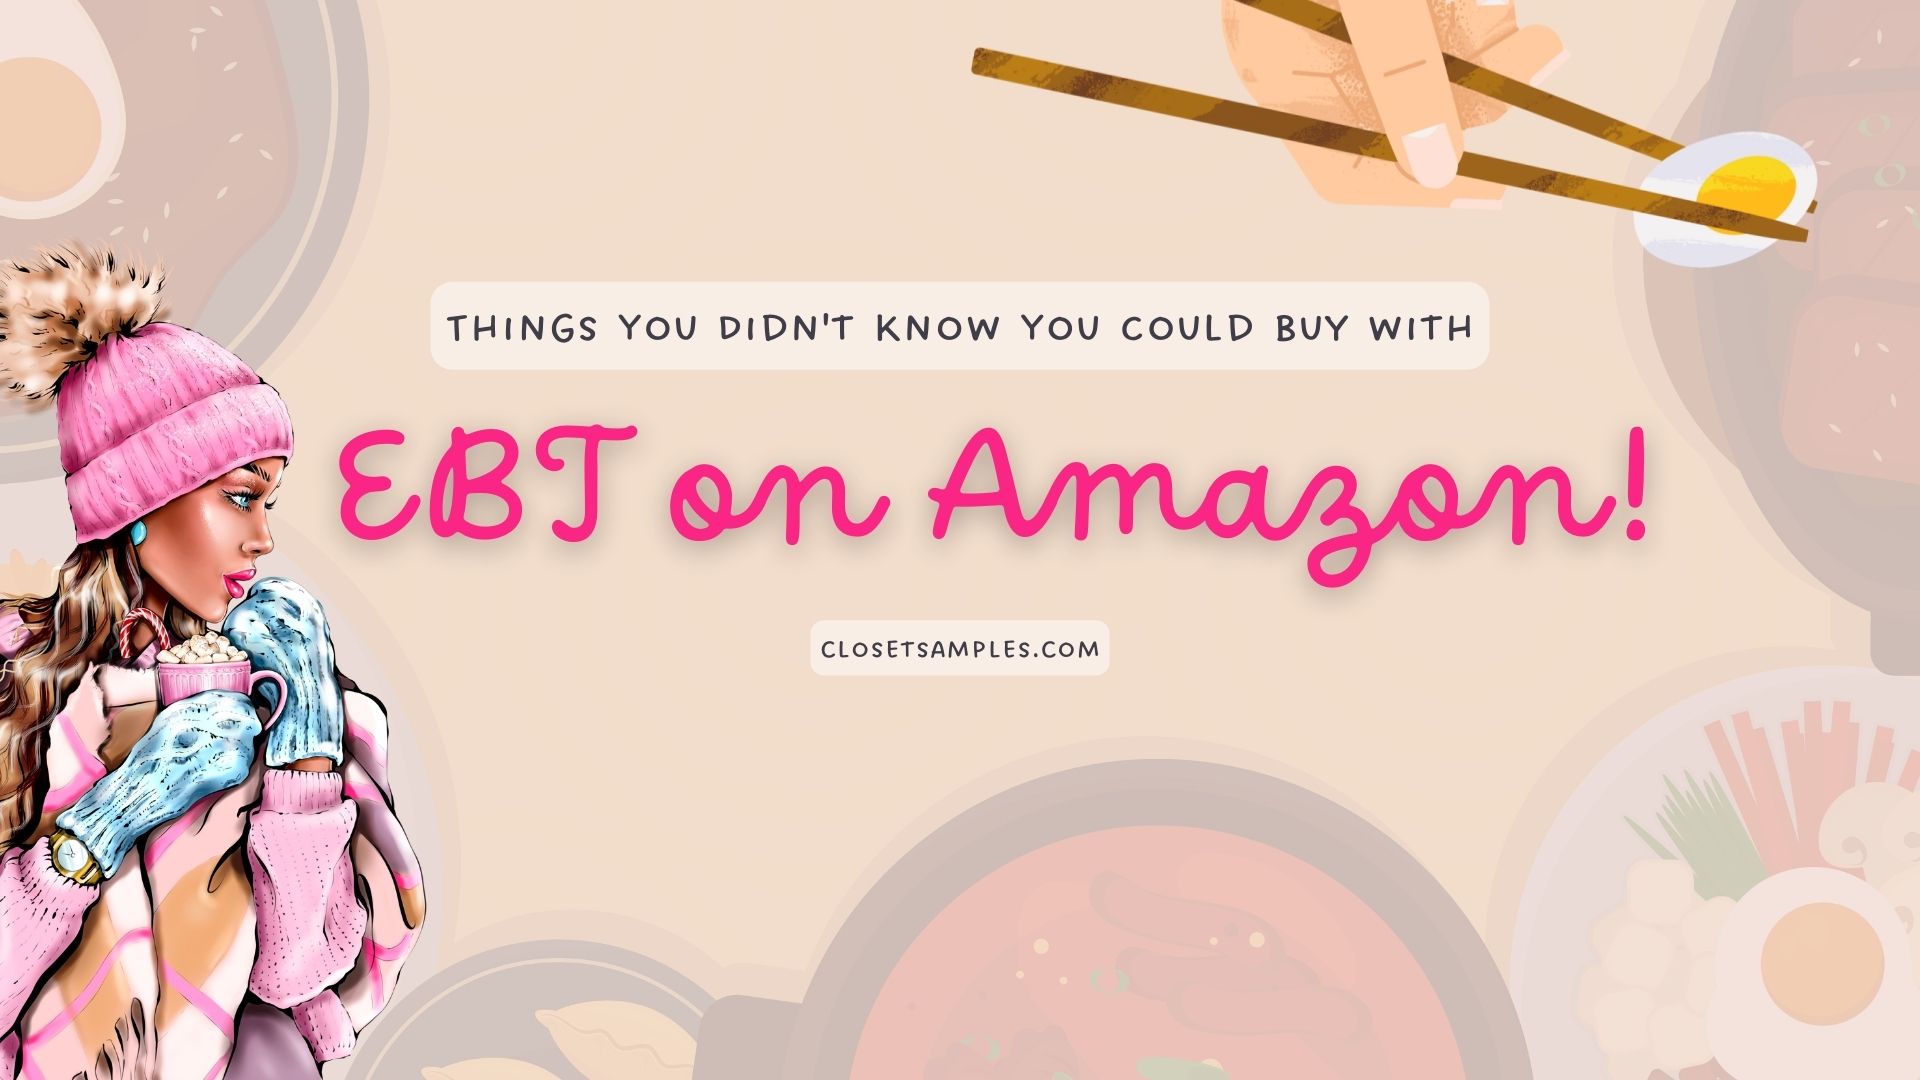 Things You Didnt Know You Could Buy with EBT on Amazon closetsamples